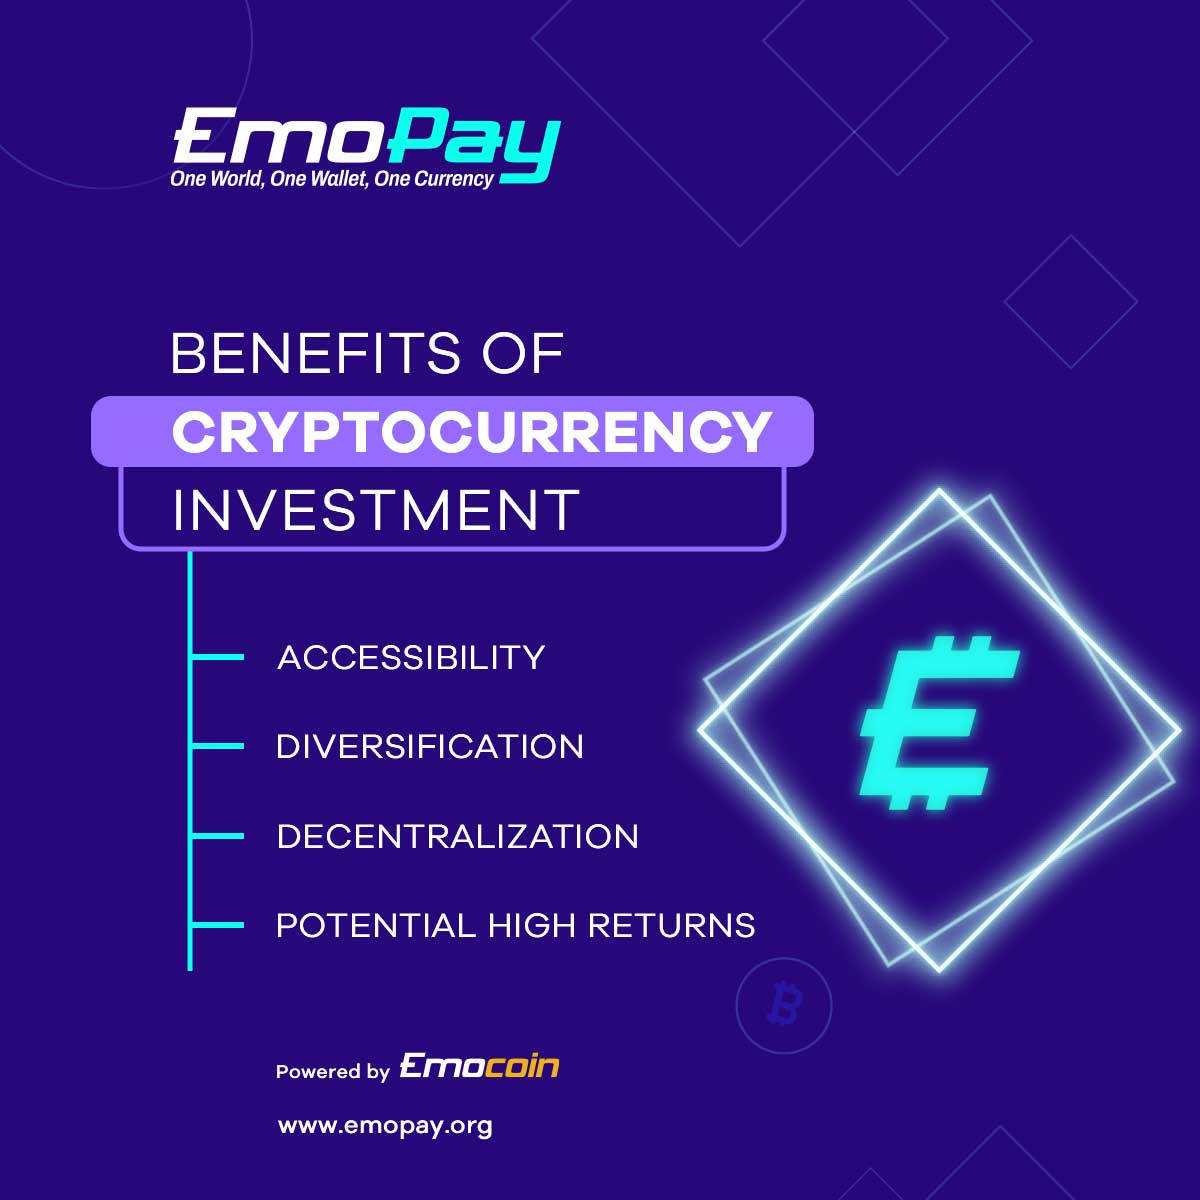 Unlocking the Power of Cryptocurrency Investment! 💰🚀

Stake now at emopay.org

#CryptoBenefits #HighReturnsAhead #Emocoin #CryptoRevolution #FinancialFreedom #Growth #InvestInYourFuture #Crypto #cryptocurrency #Emopay #investment #secure #benefits #sundayvibes